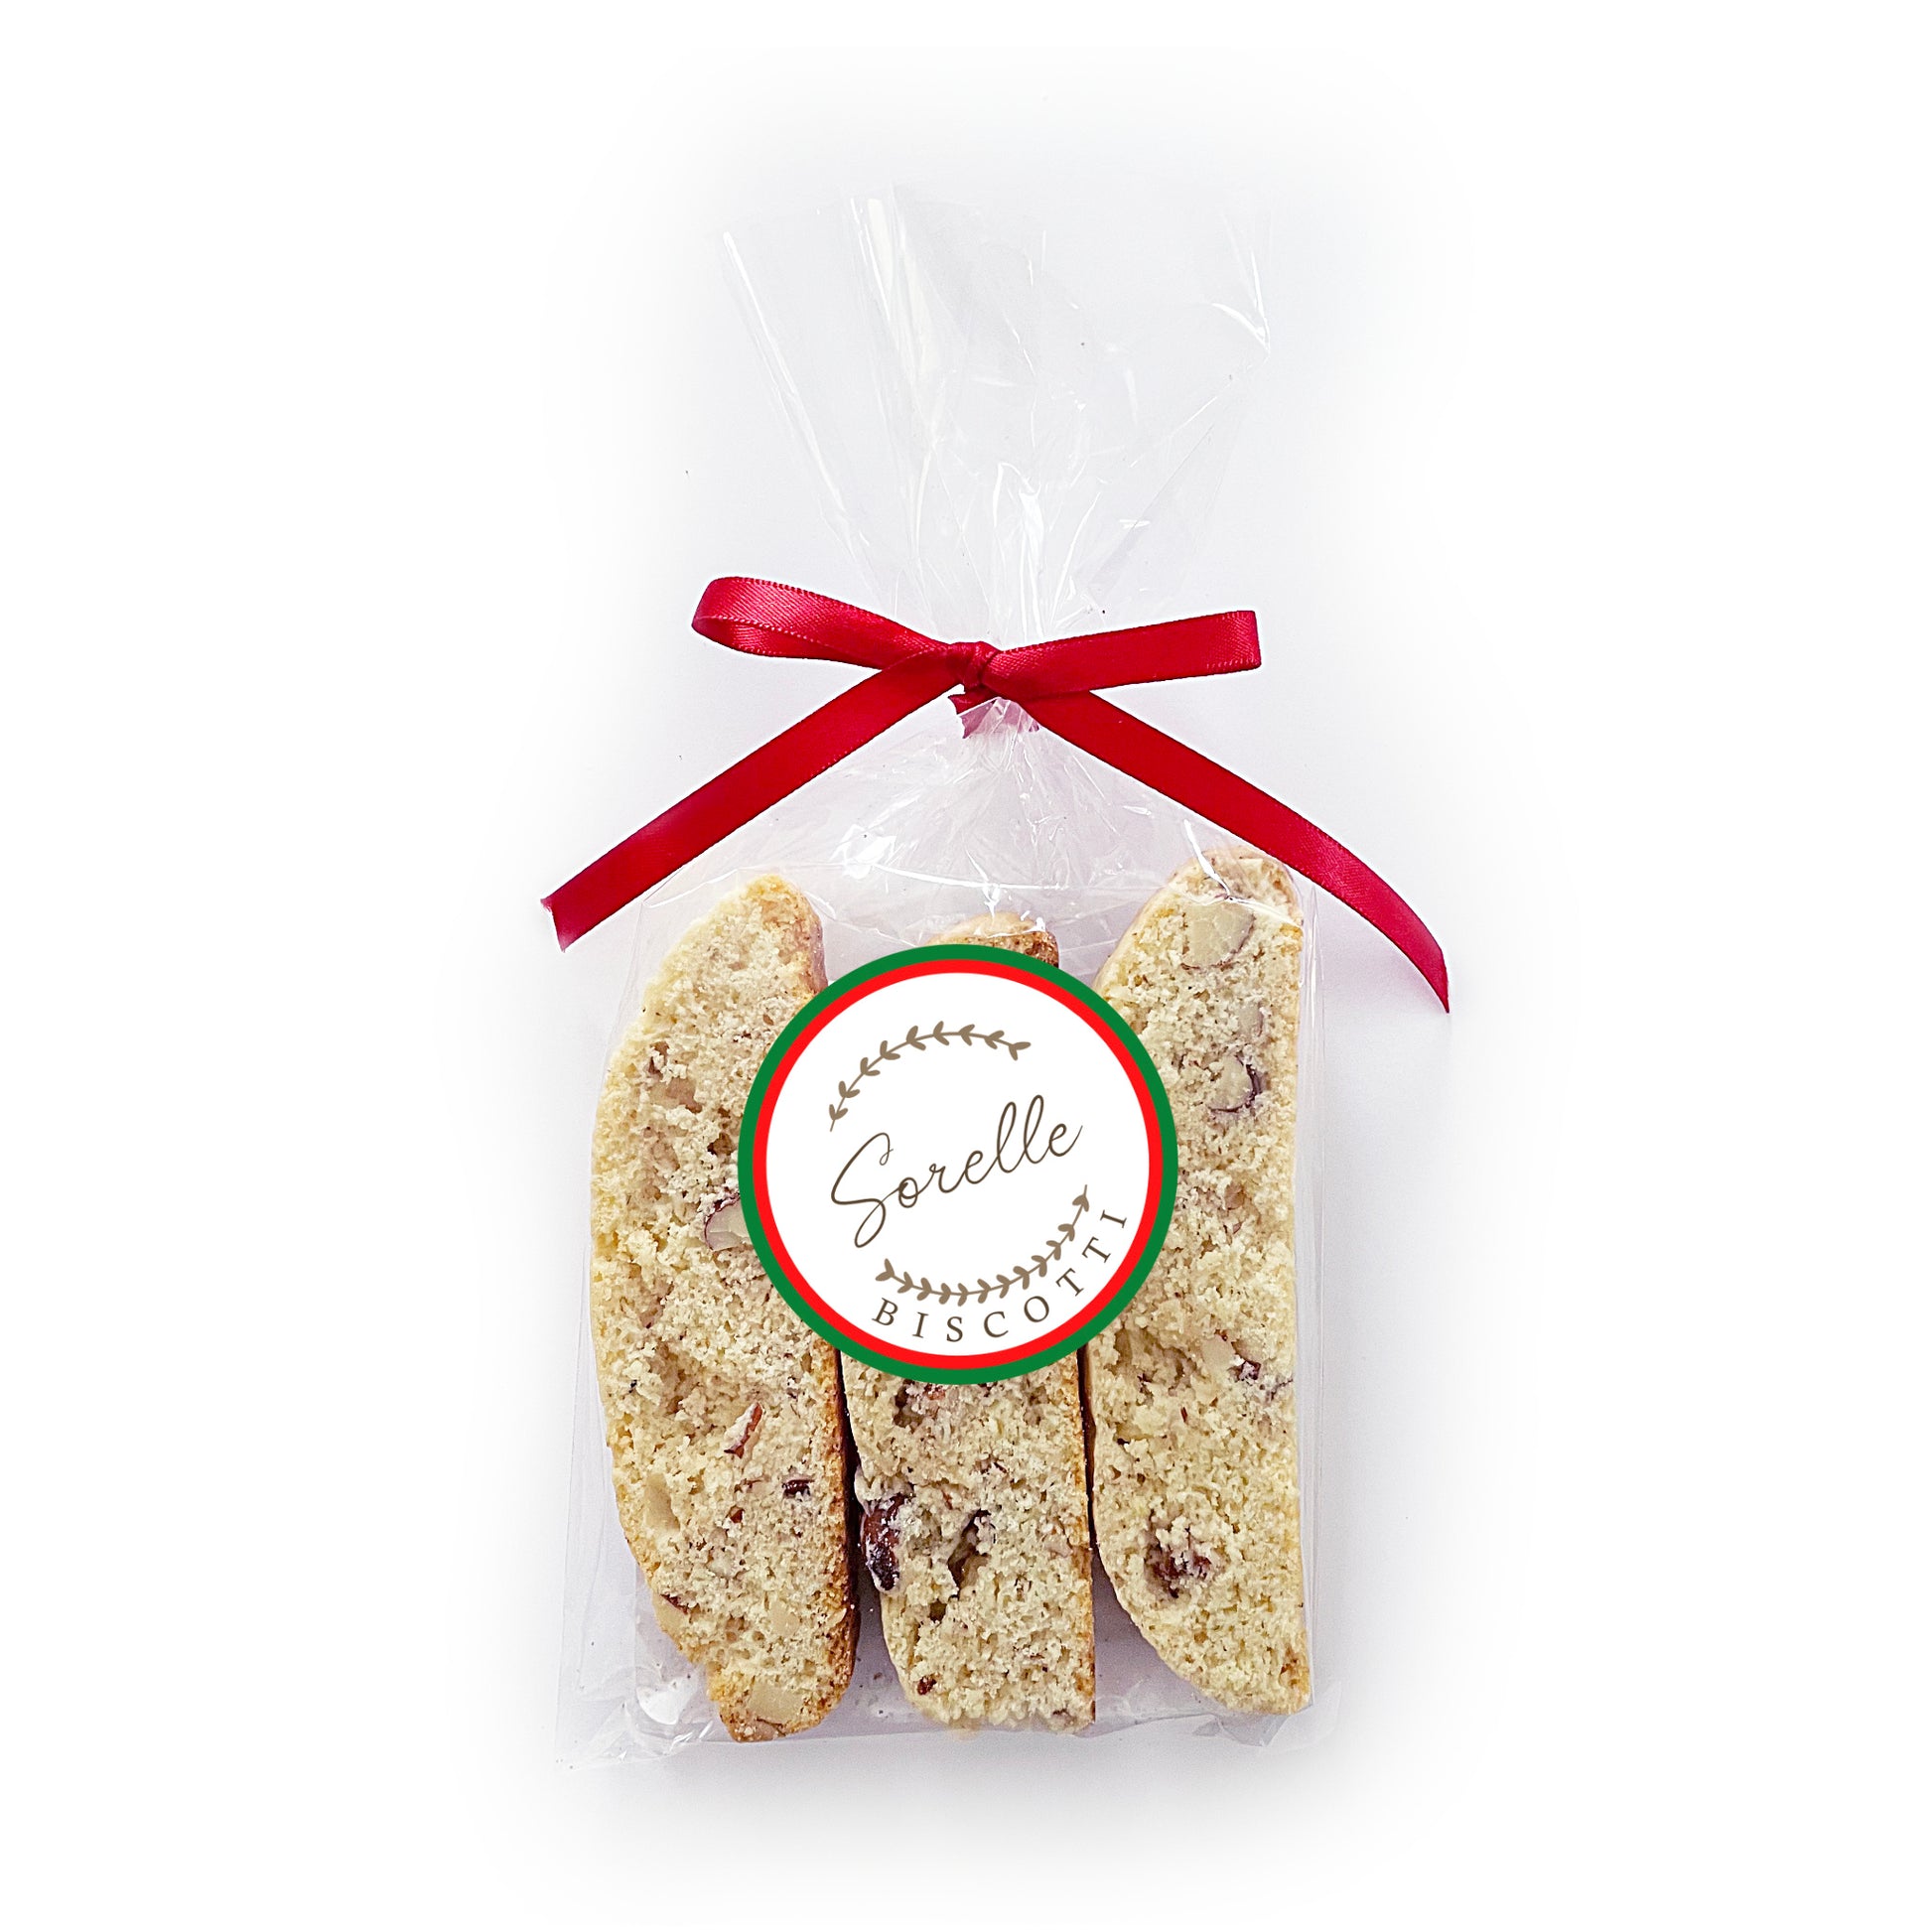 Sorelle Biscotti LLC 3 pack Beta's traditional anise almond biscotti cookies